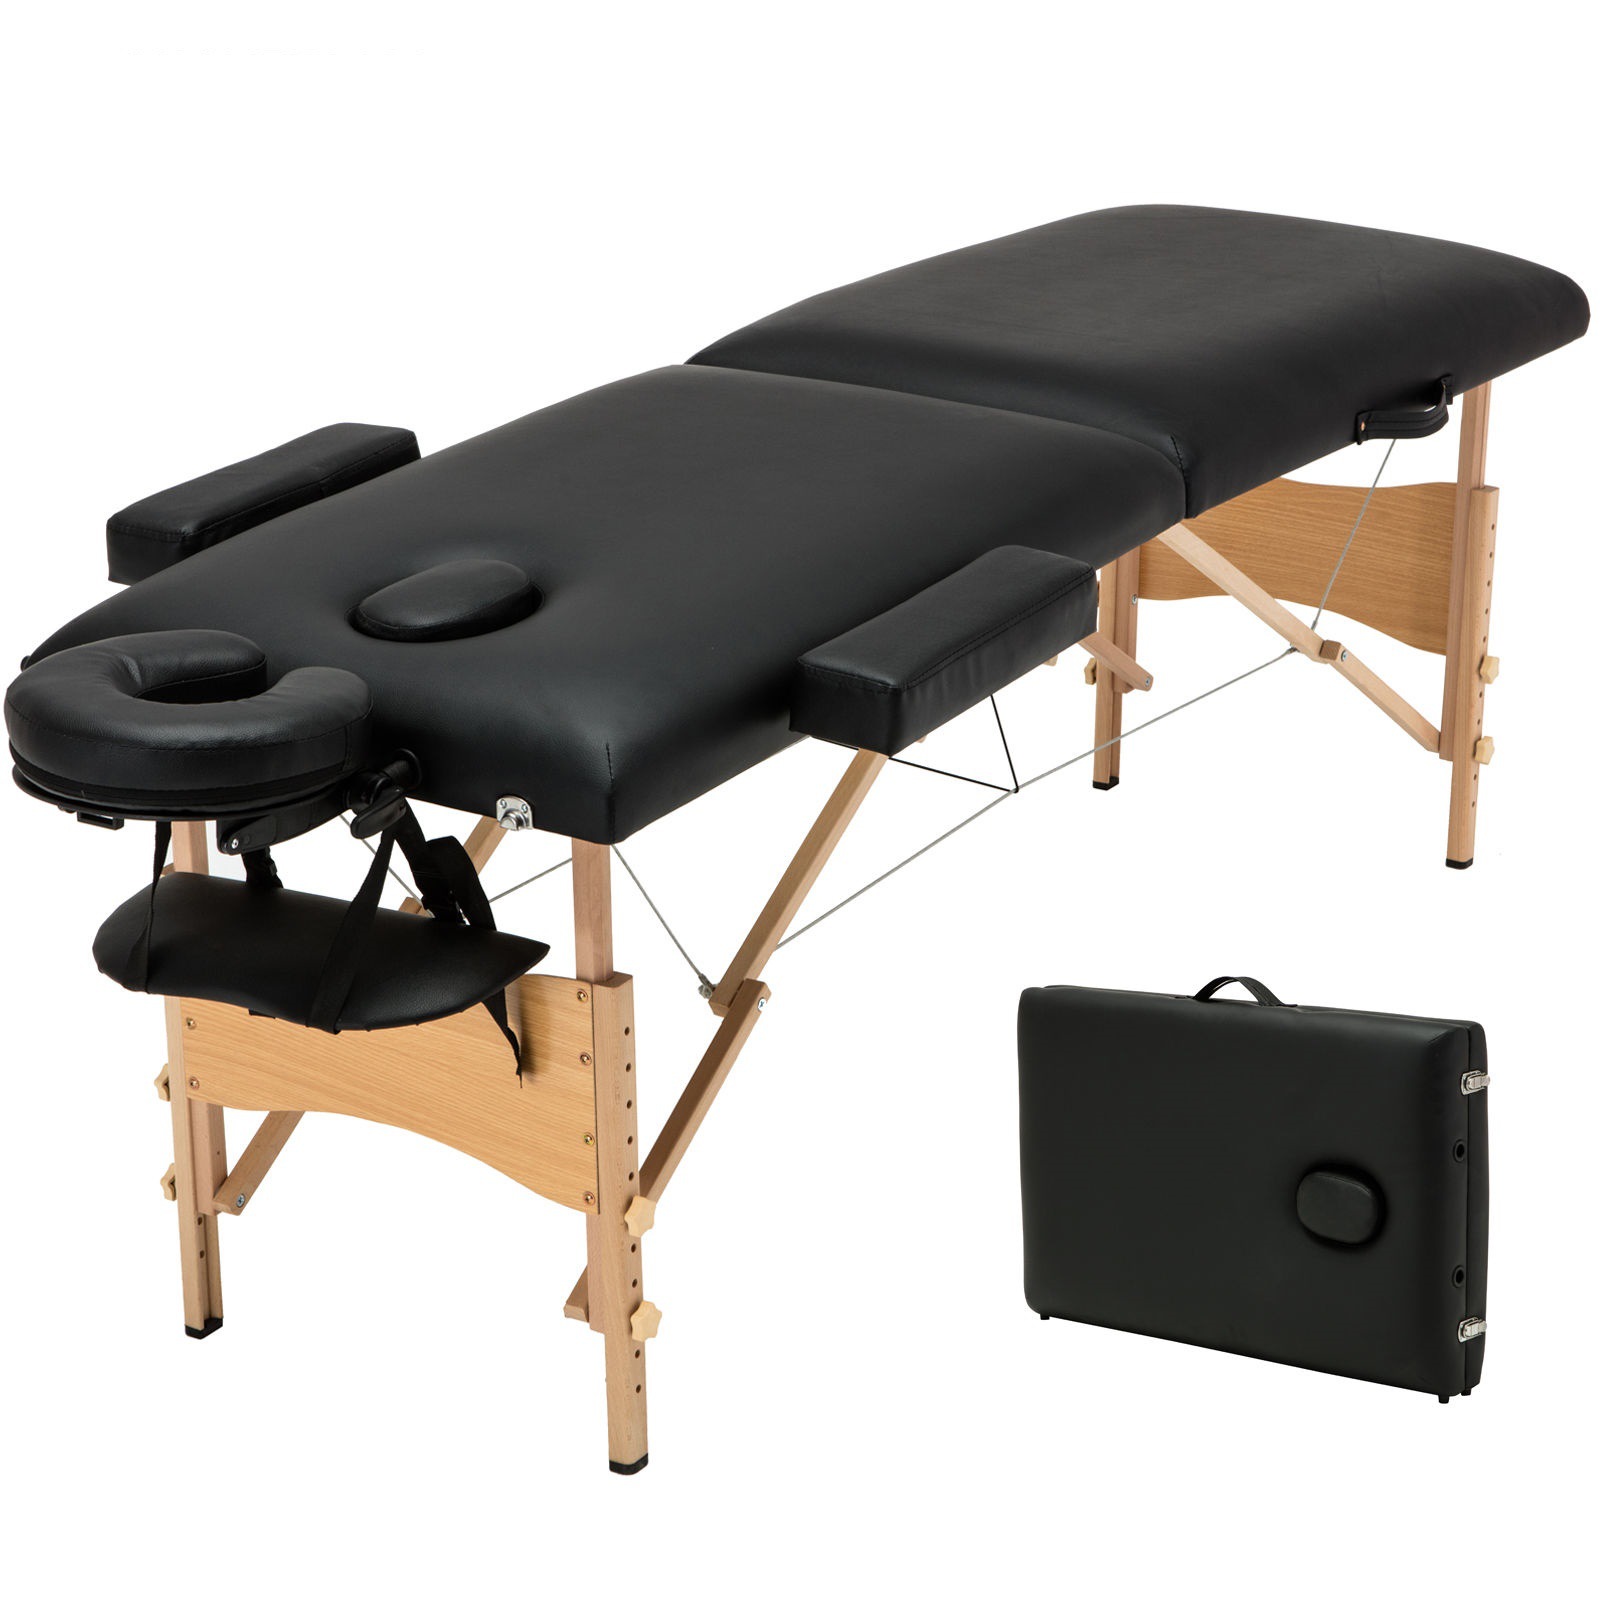 Portable wooden massage table folding bed